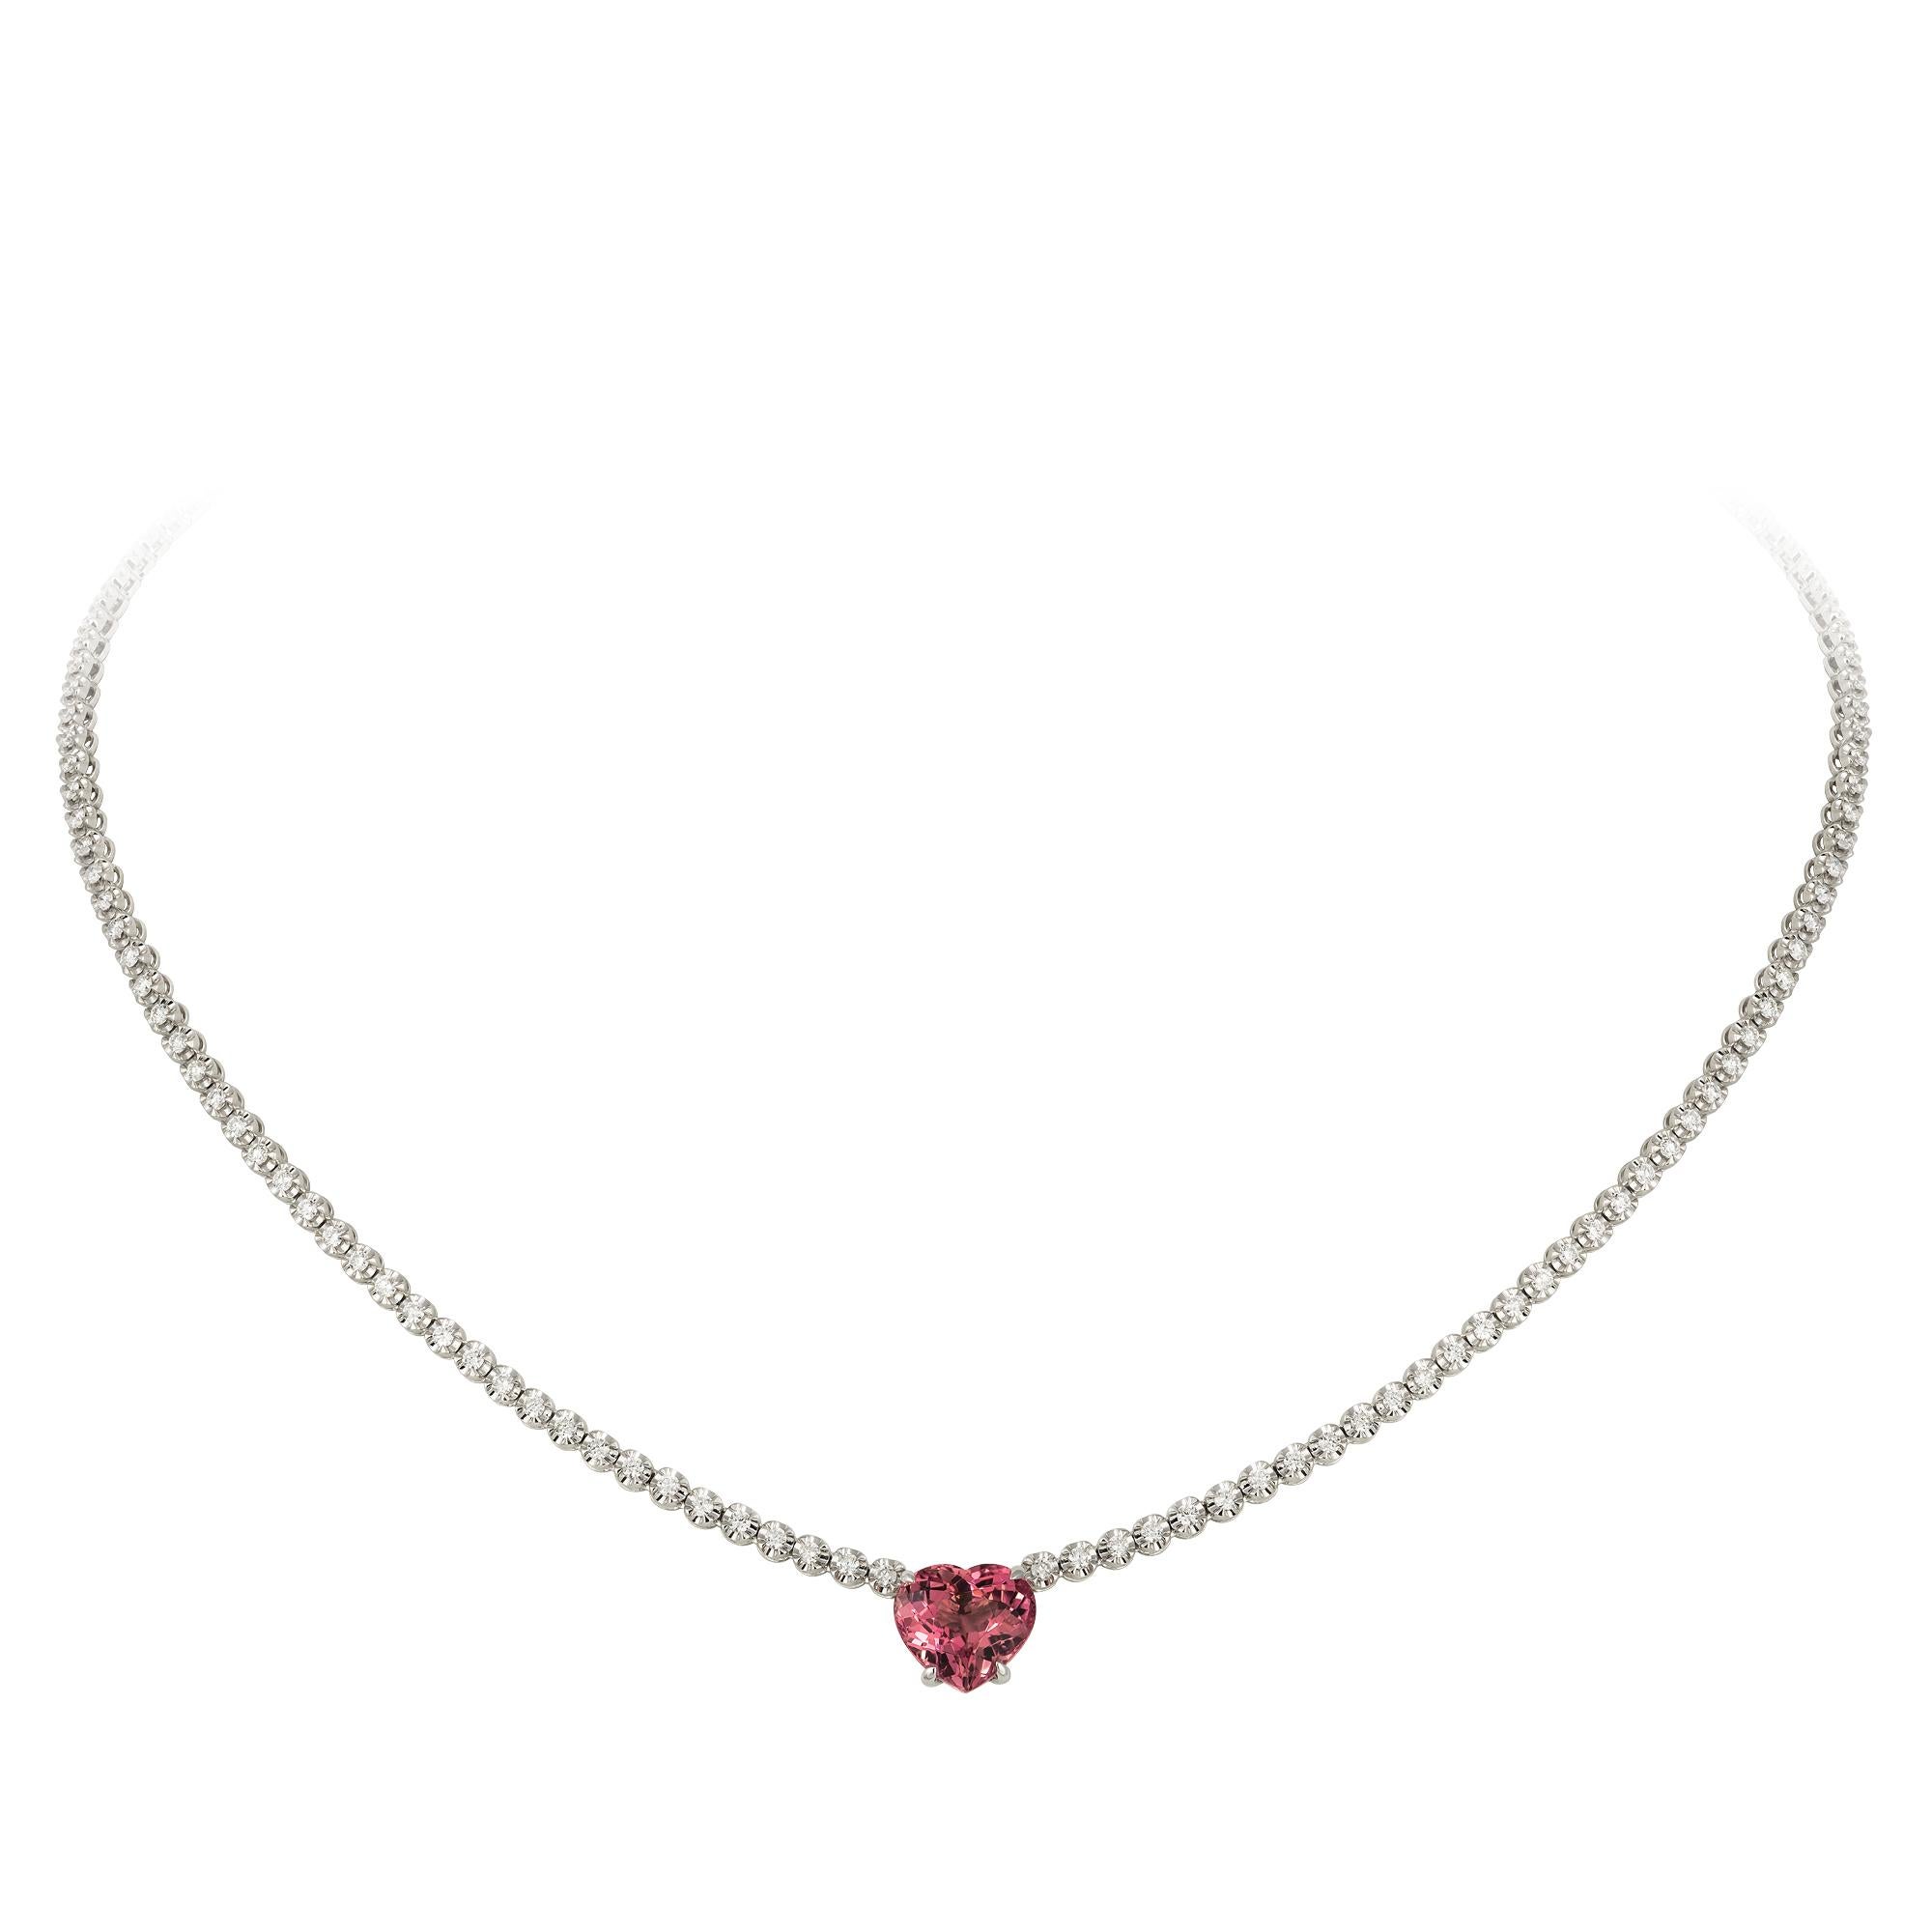 NECKLACE 18K Yellow Gold 
Diamond 2.10 Cts/149 Pcs 
PT 4.52 Cts/1 Pcs

With a heritage of ancient fine Swiss jewelry traditions, NATKINA is a Geneva based jewellery brand, which creates modern jewellery masterpieces suitable for every day life.
It